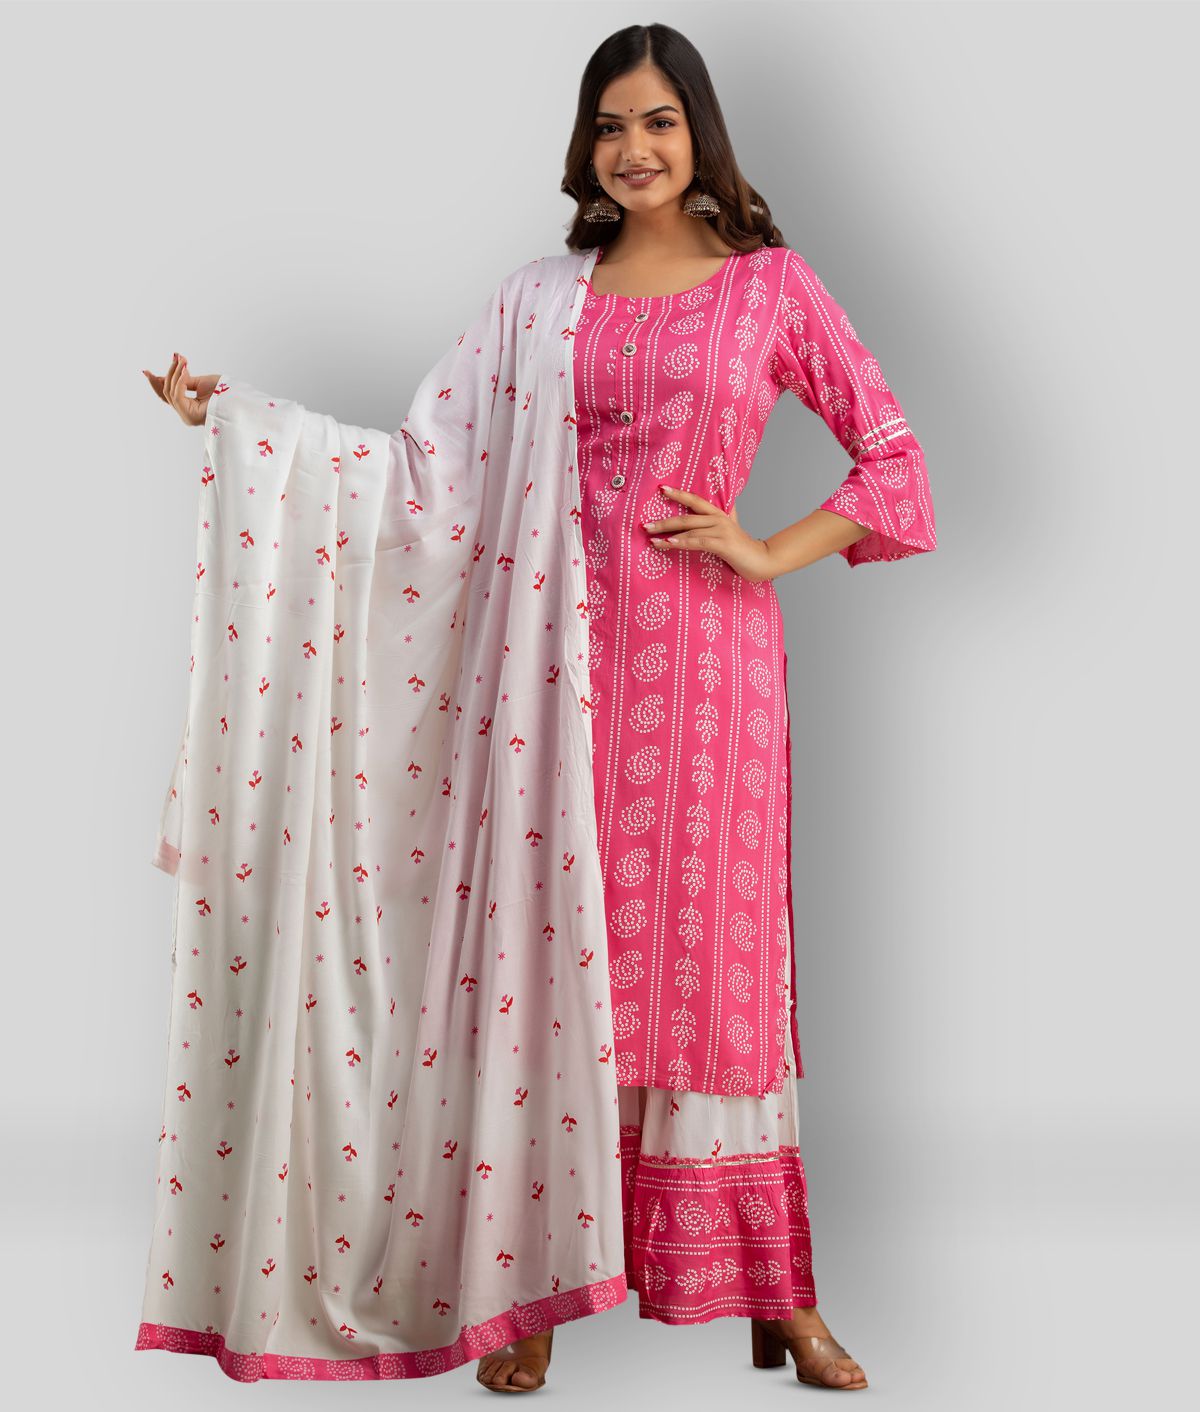     			Lee Moda - Pink Straight Rayon Women's Stitched Salwar Suit ( Pack of 1 )